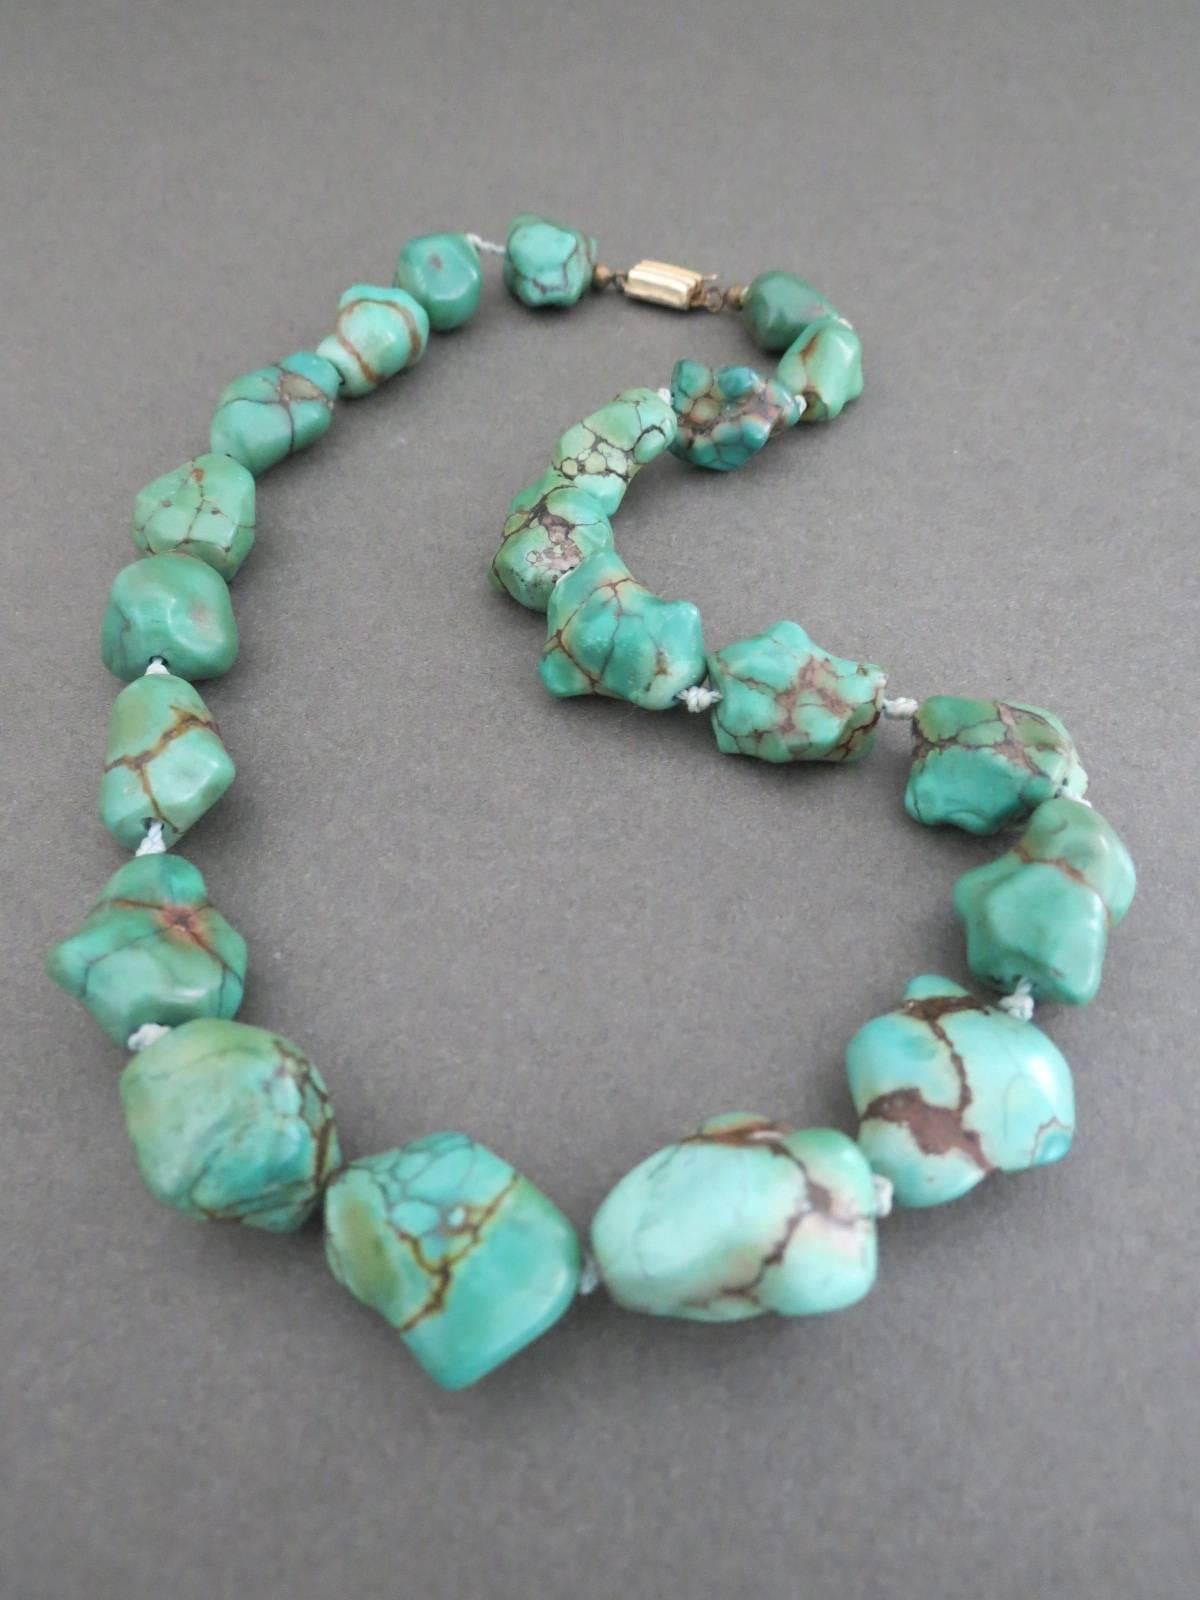 This lovely turquoise nugget bead necklace is from China. The necklace has pretty decorated clasp . The clasp functions well . Hallmarked.
Item Specifics
Length: 46cm (approx 18.00